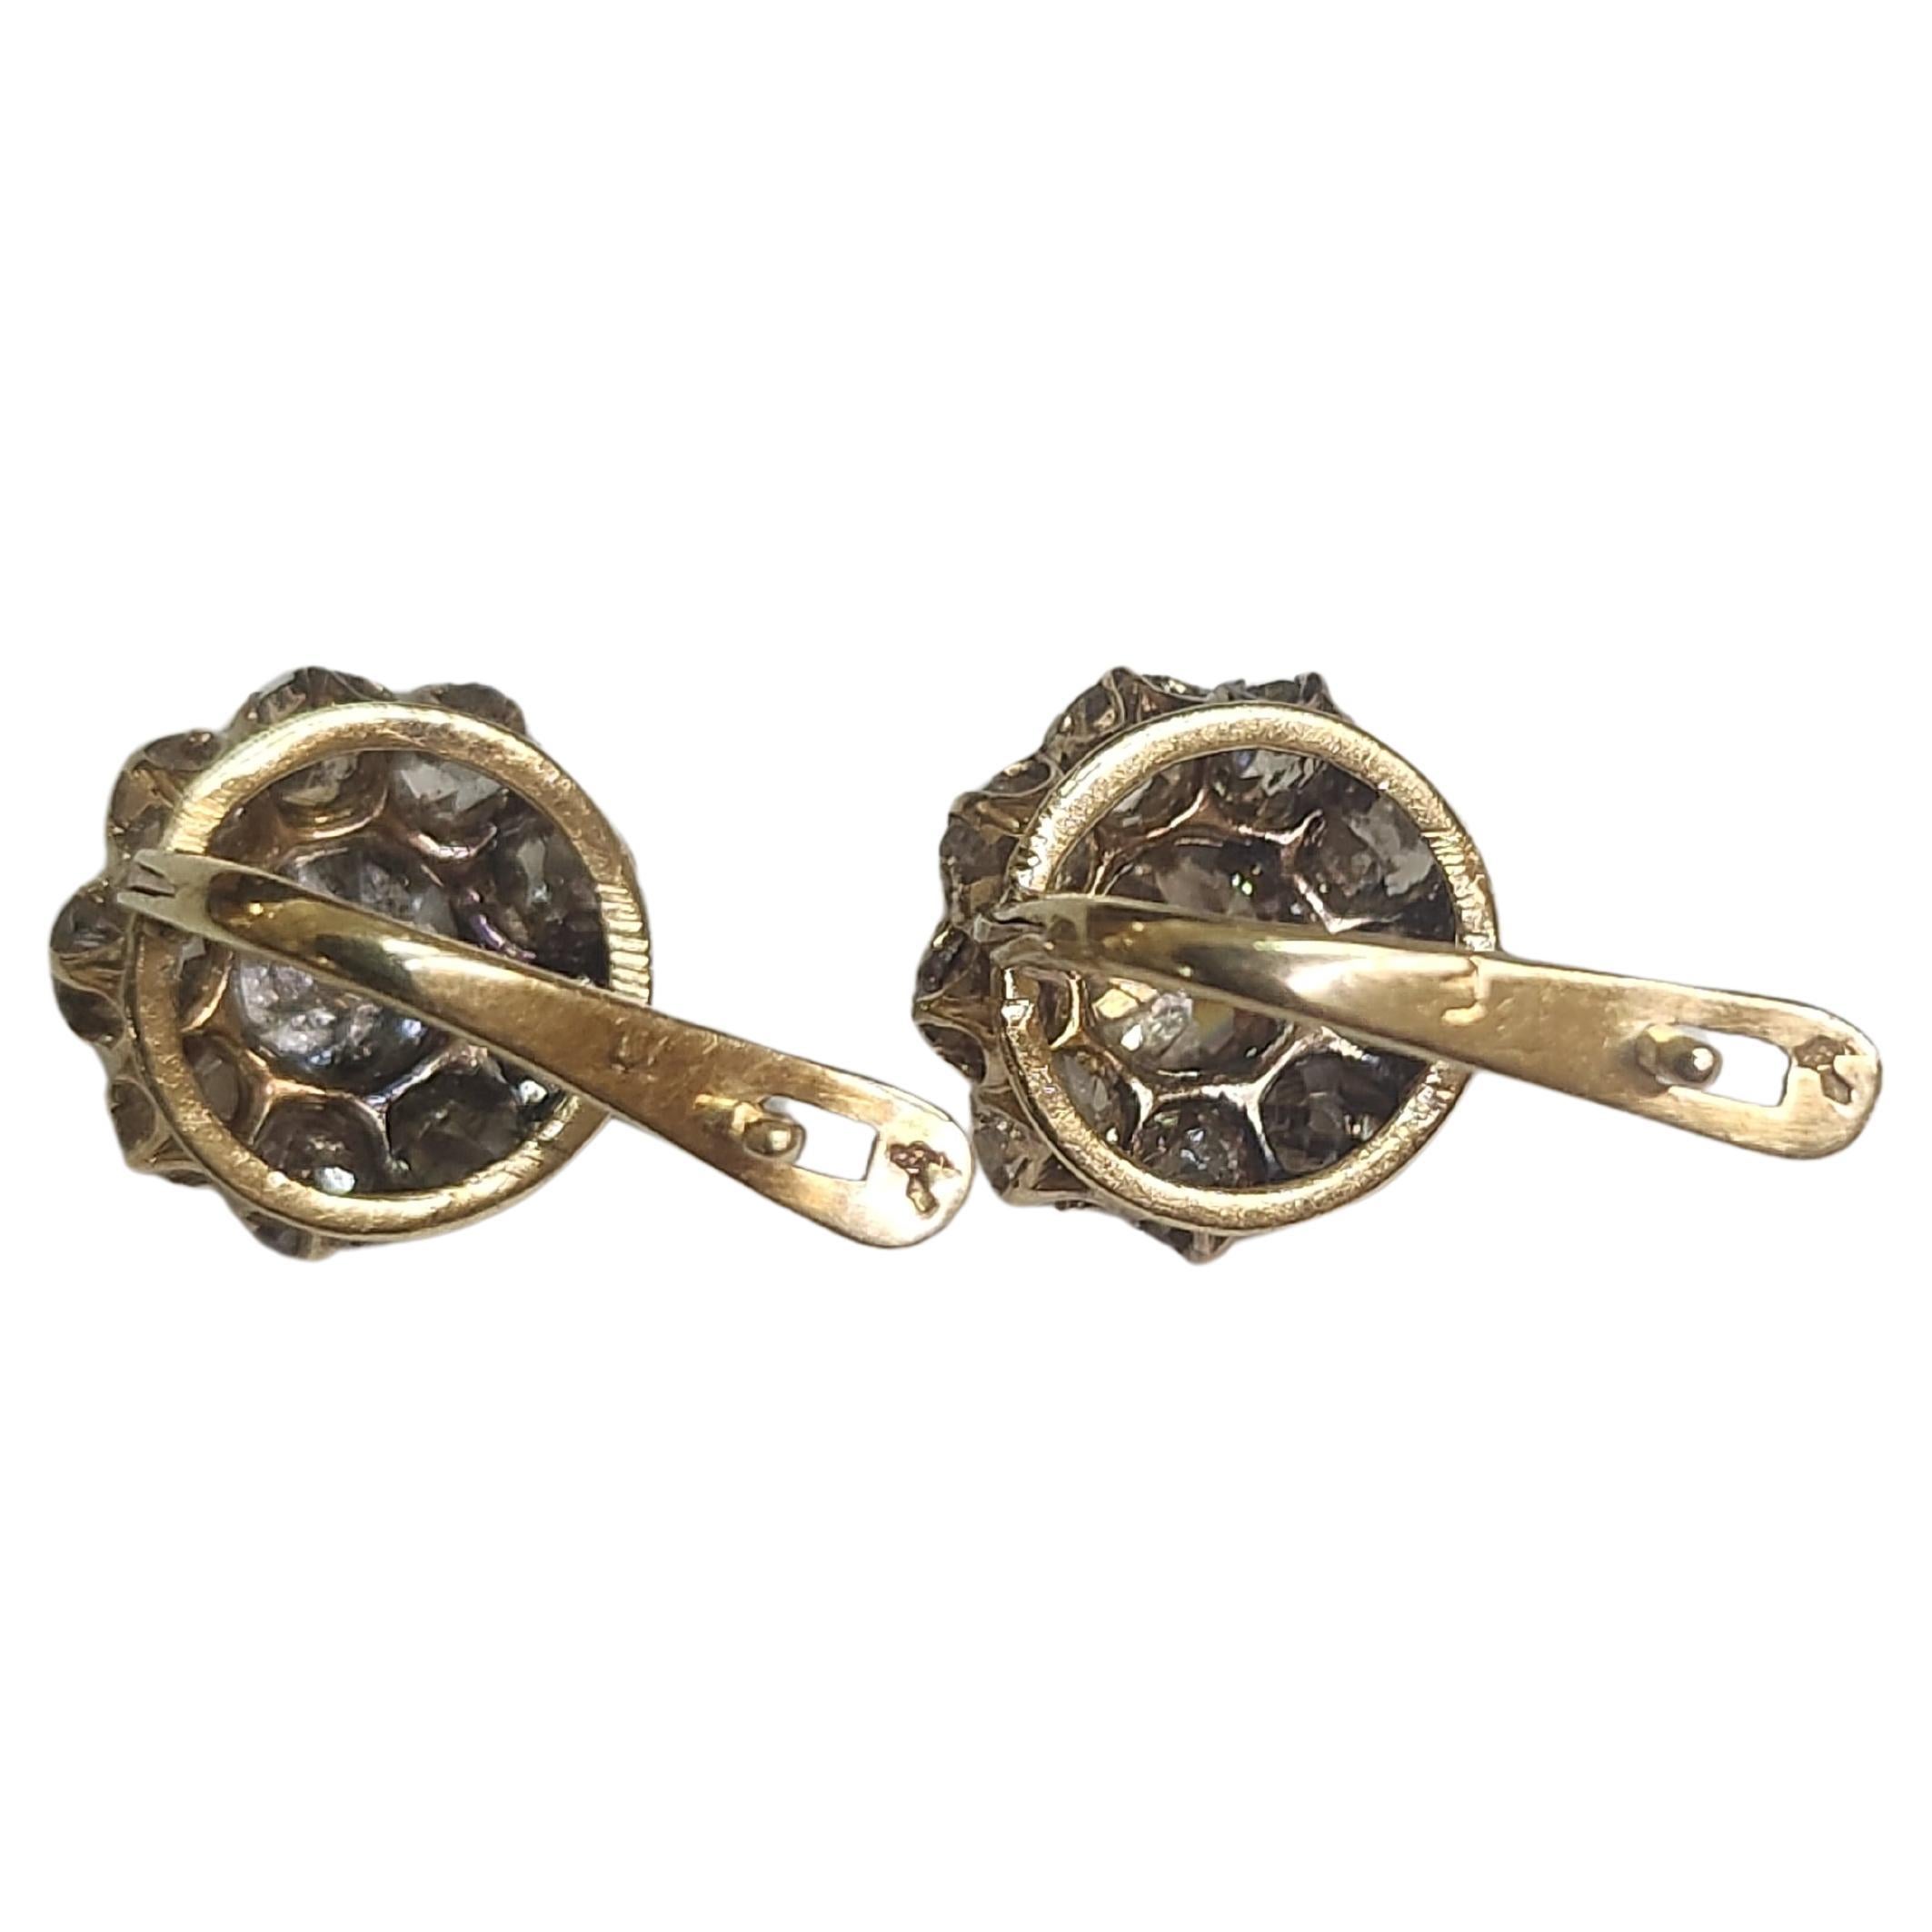 Antique old mine cut diamond earrings with an estimate weight 1.3 carats si clearity inclosions included excellent spark in 18k gold setting 